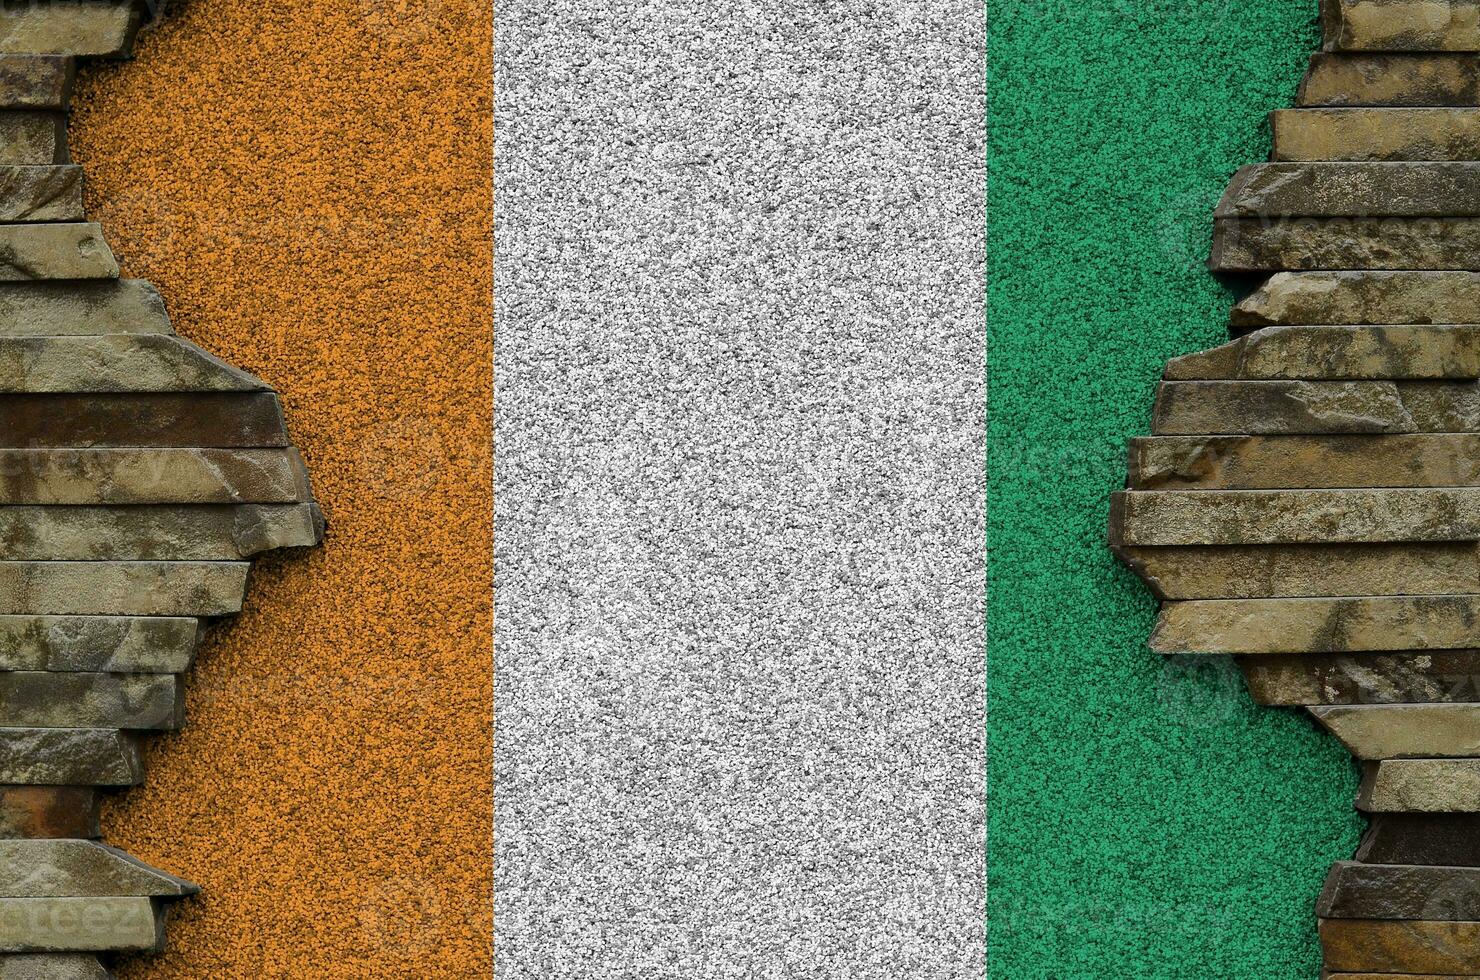 Ivory Coast flag depicted in paint colors on old stone wall closeup. Textured banner on rock wall background photo